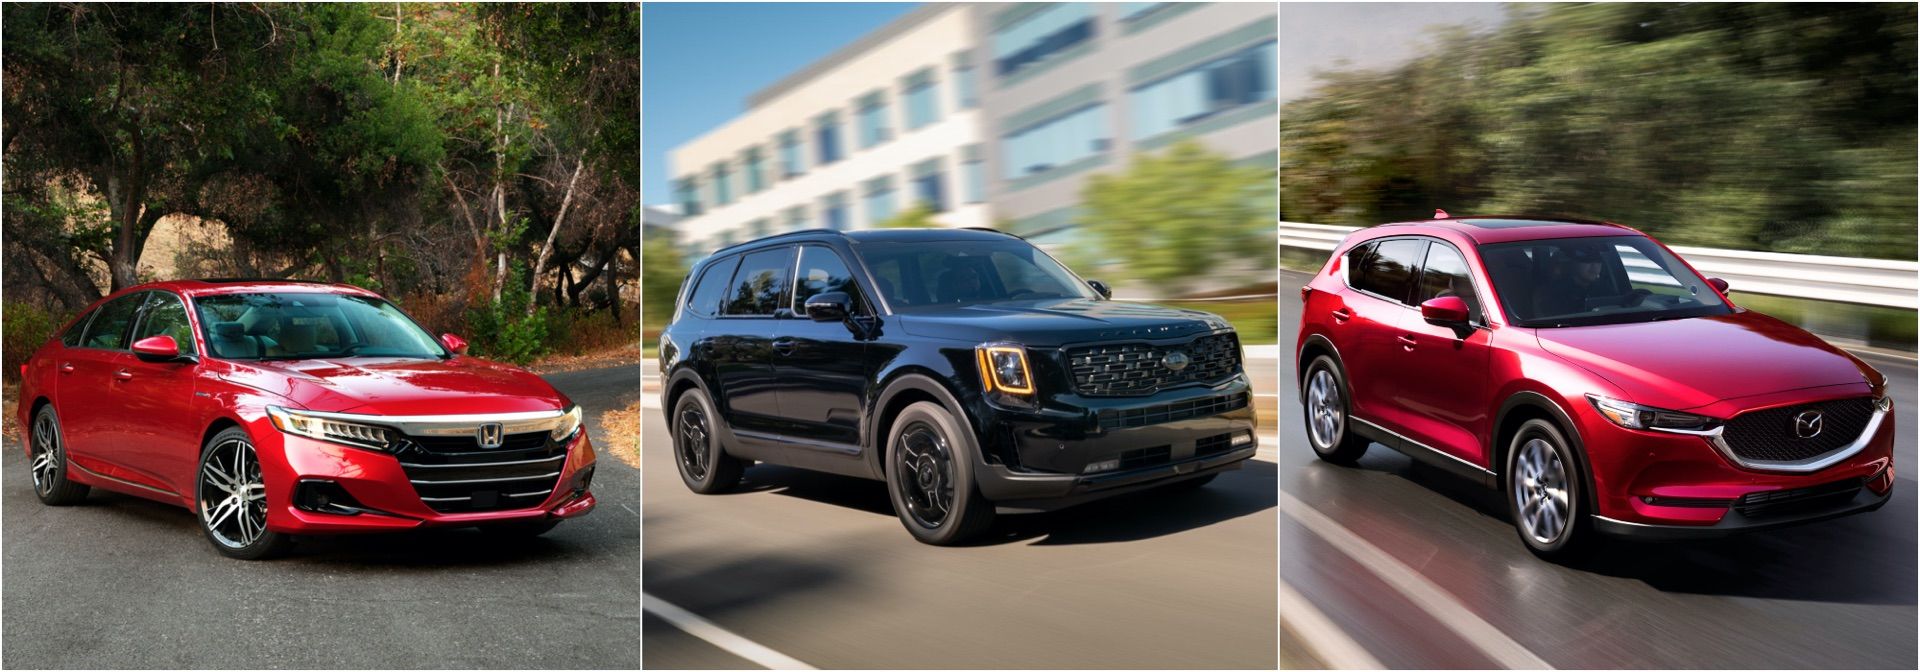 Centennial Auto Group Congratulates Winners Of Car And Driver 10 Best Awards For 2020: Telluride, Accord, CX-5